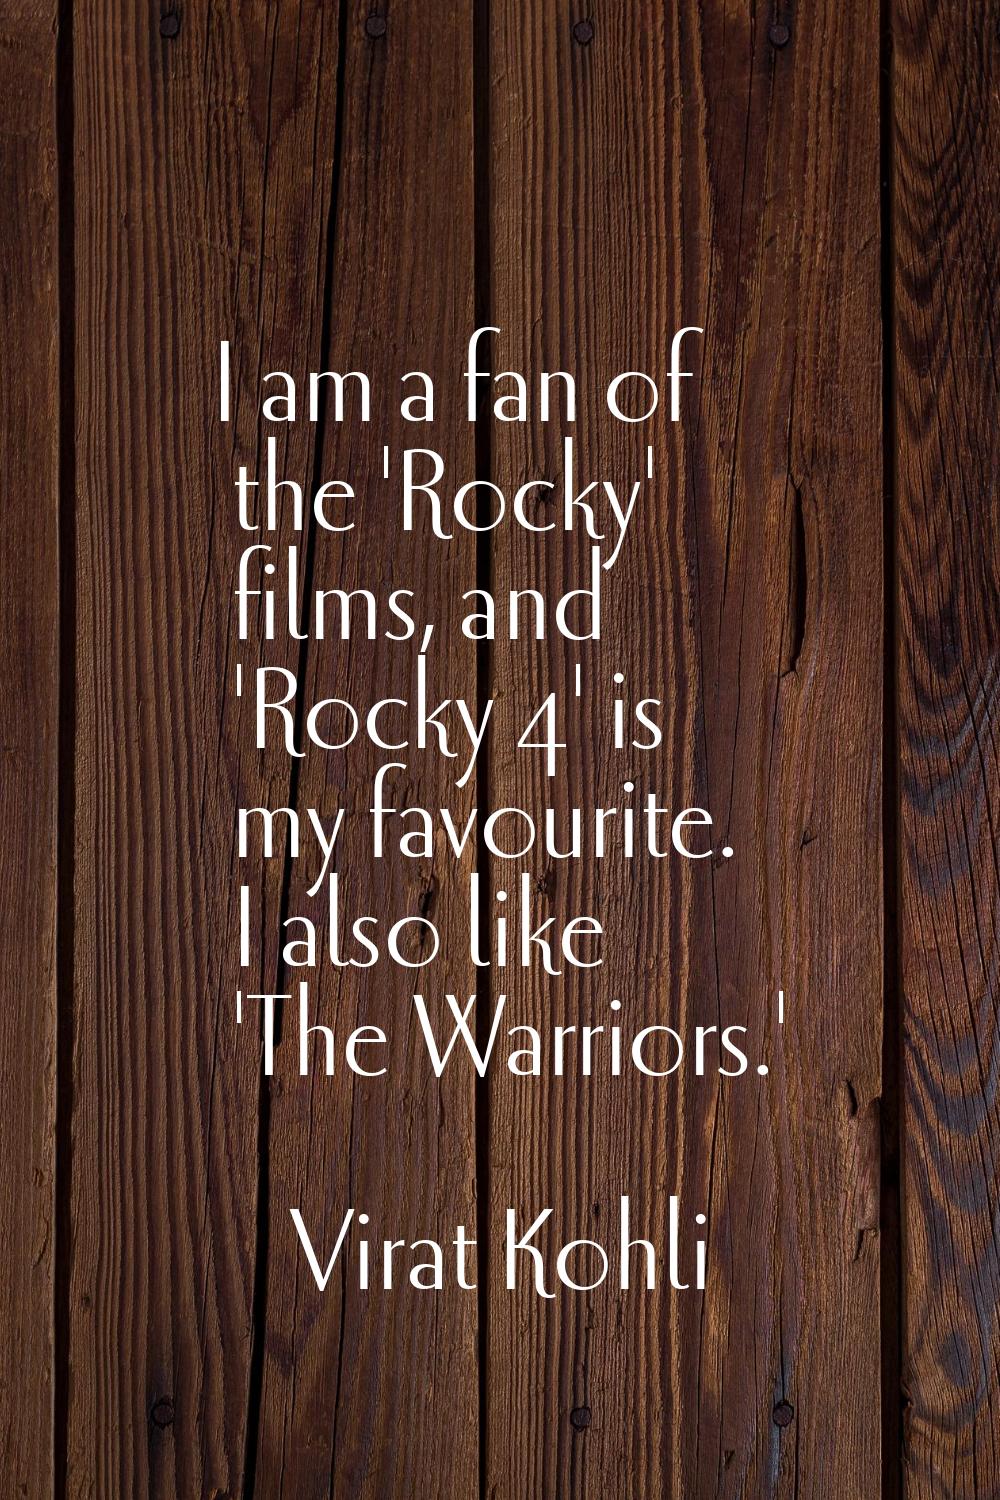 I am a fan of the 'Rocky' films, and 'Rocky 4' is my favourite. I also like 'The Warriors.'